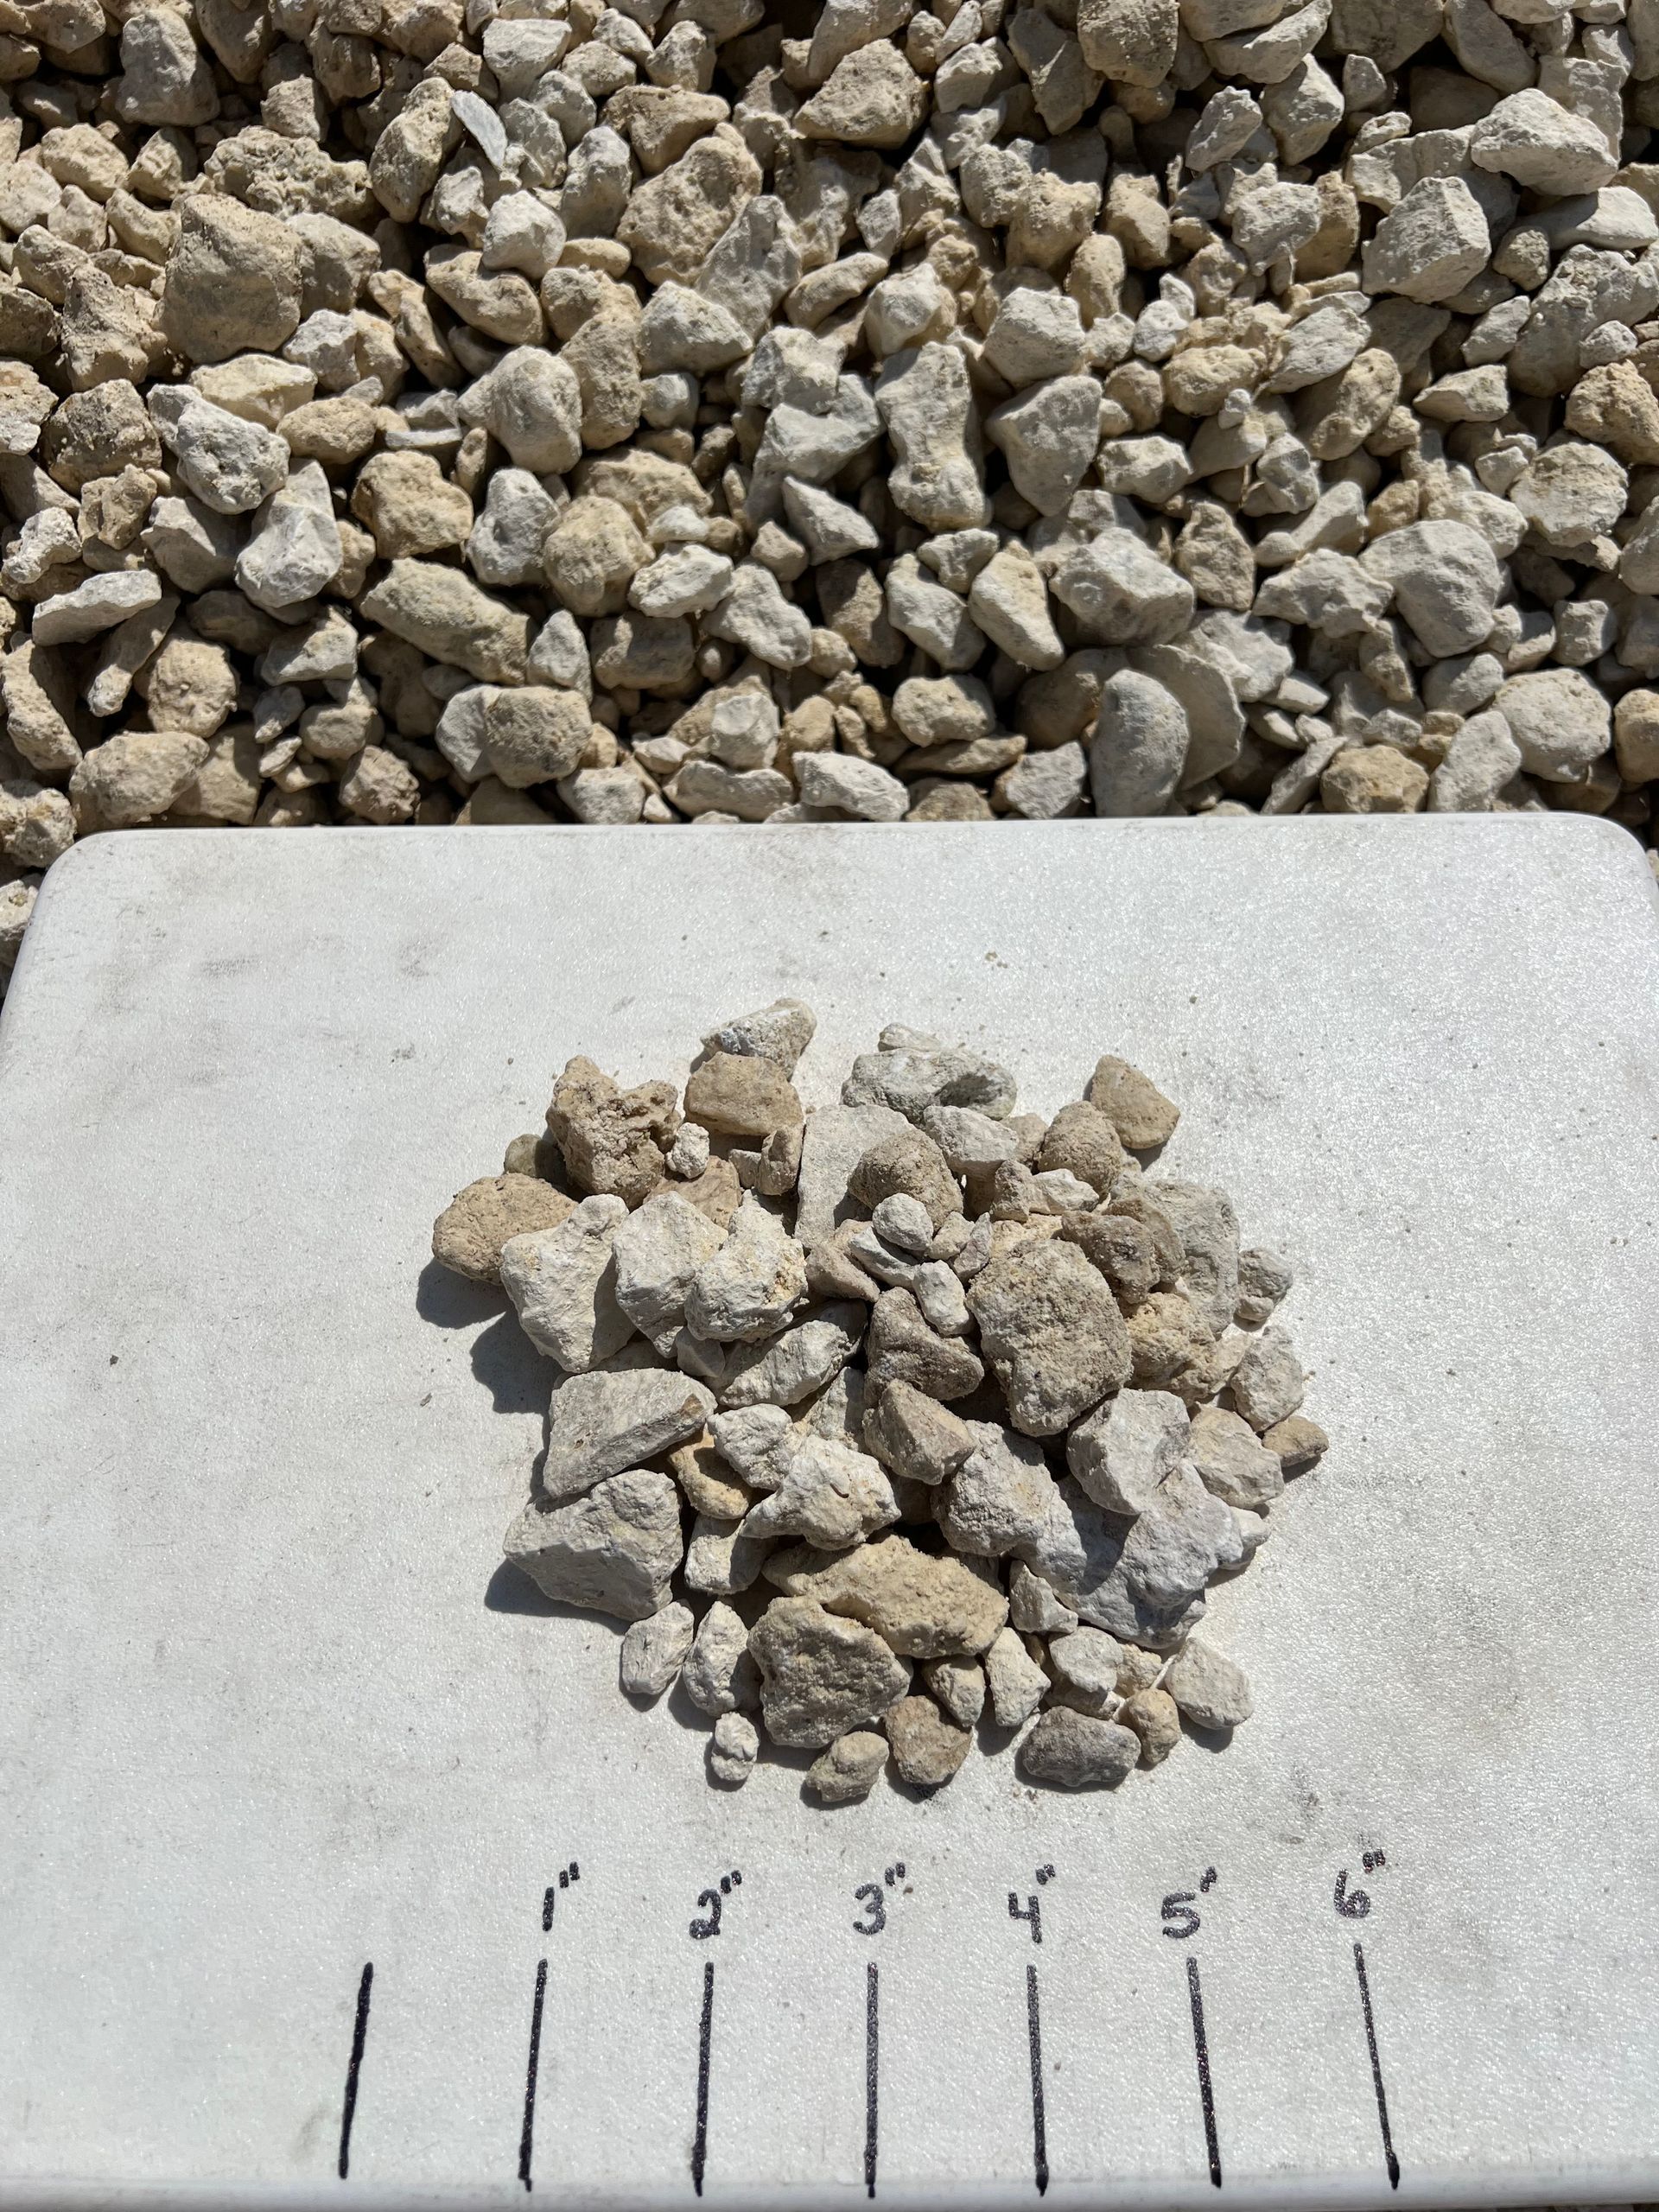 A pile of 57 Limestone sitting on top of a white surface